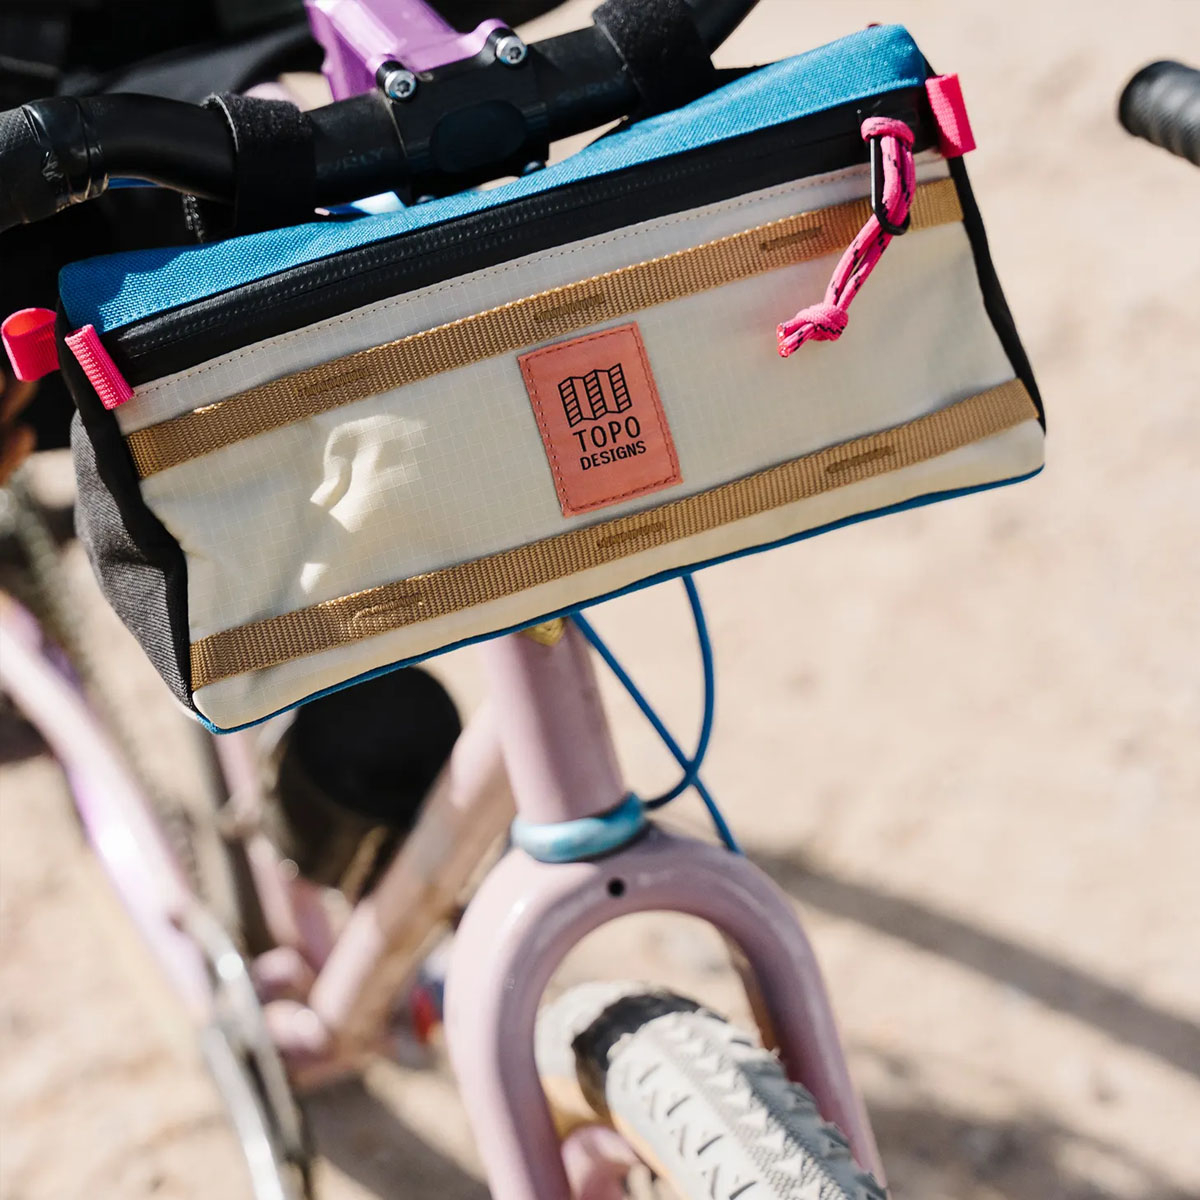 Topo Designs Bike Bag, Versatile bag to attach to the front bar of your bike.